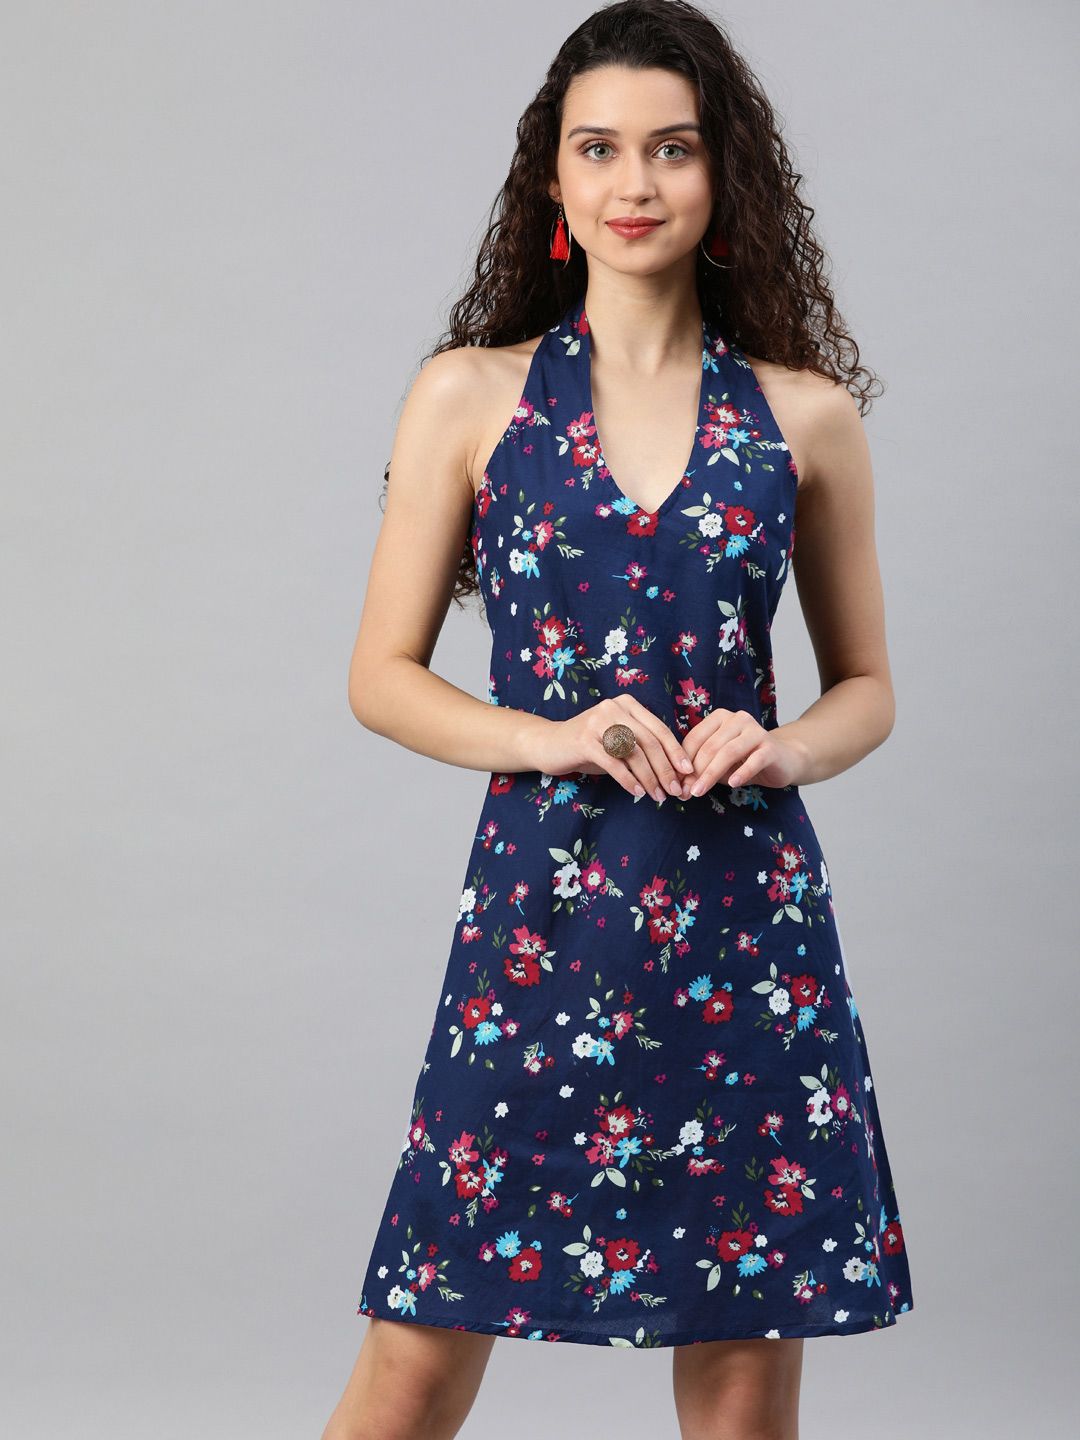 YASH GALLERY Women Blue Printed A-Line Dress Price in India